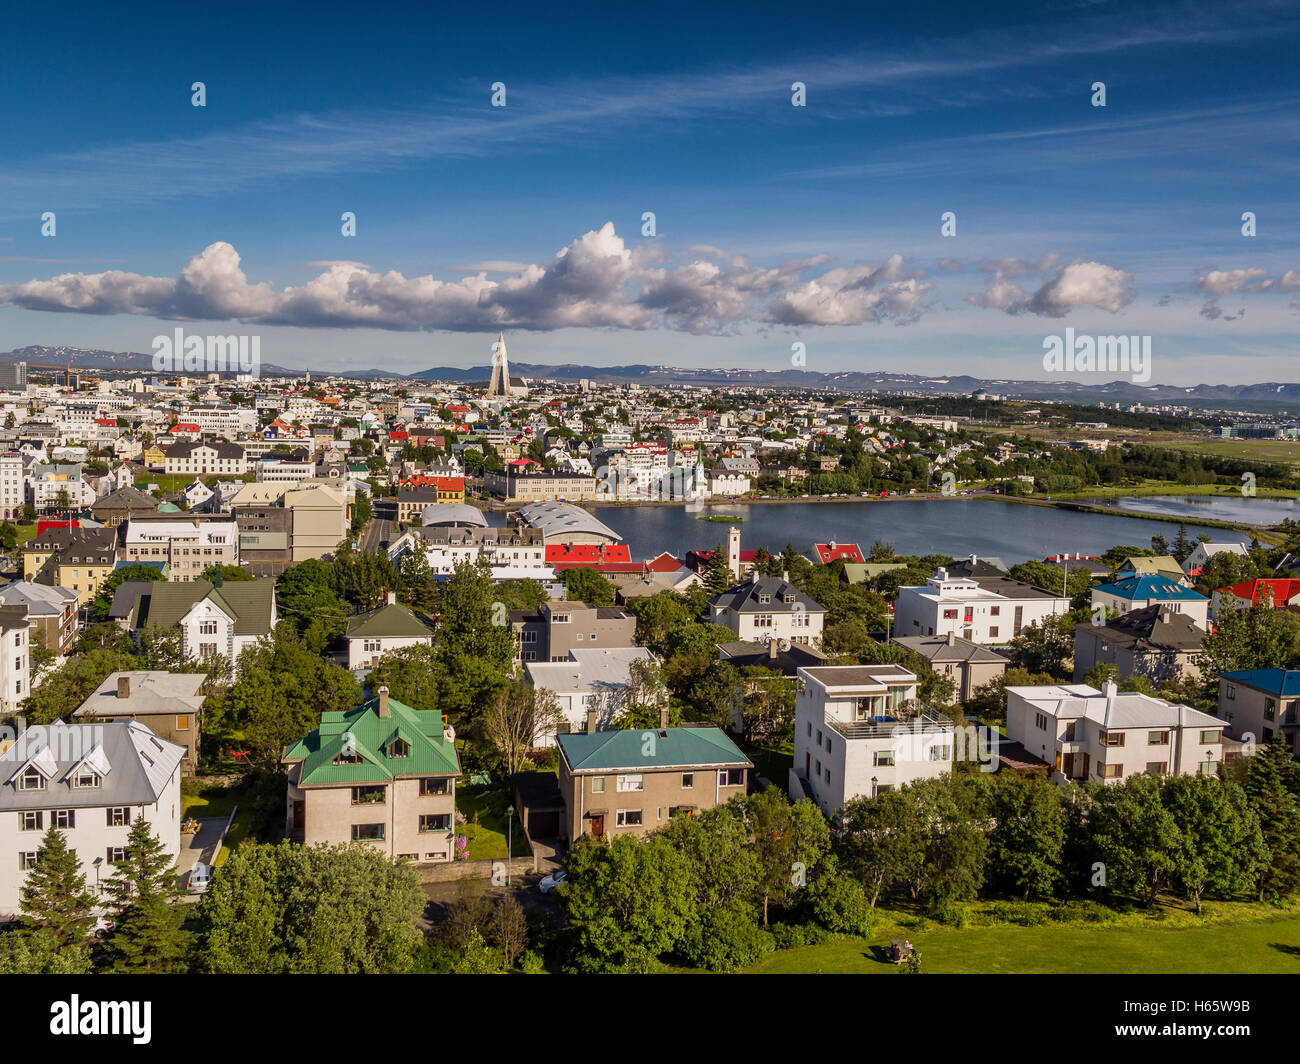 Aerial view of a neighborhood in Reykjavik, Iceland. This image is shot using a drone. Stock Photo